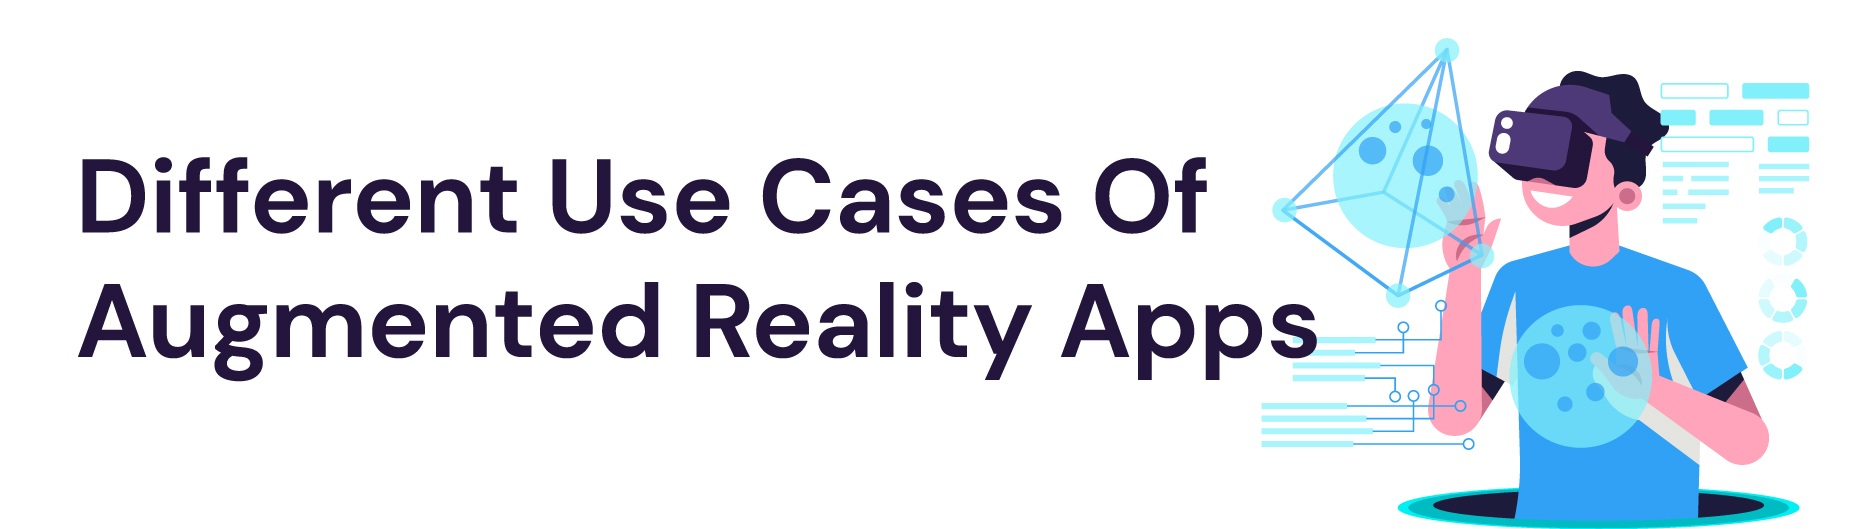 use cases of AR apps